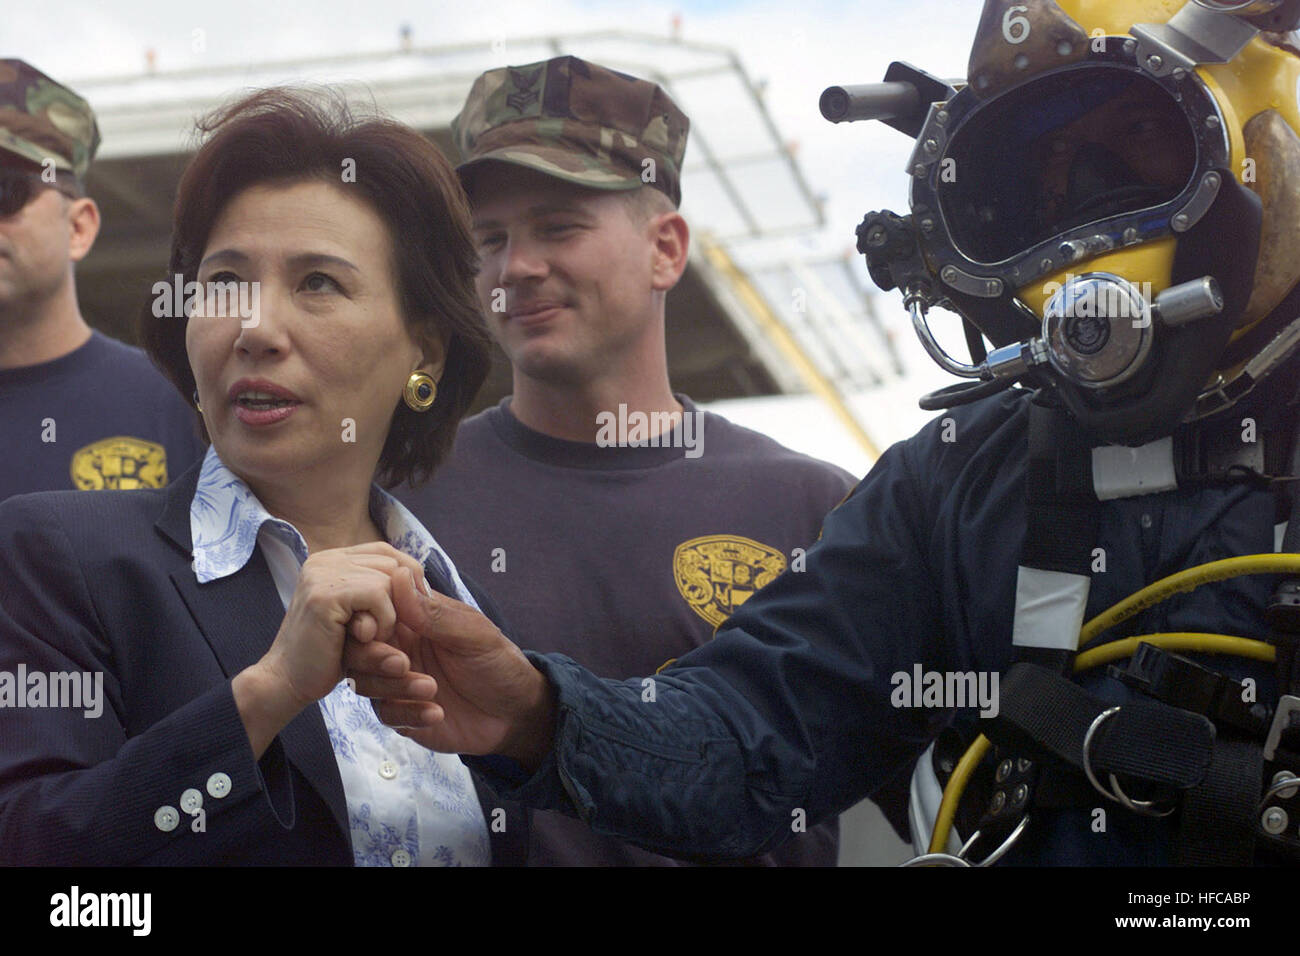 Her Excellency Makiko Tanaka, Minister of Foreign Affairs, Japan, shakes hands with US Navy (USN) Chief Boatswain’s Mate (BMC), Diver (DV) Robert Lastimosa, from Mobile Diving and Salvage Unit One (MDSU-1) after he presents her with a Navy divers coin. Mrs. Tanaka came to lend her support and received an update on the USN led effort during recovery operations for the Japanese fishing vessel Ehime Maru. Makiko Tanaka Ehime Maru Stock Photo